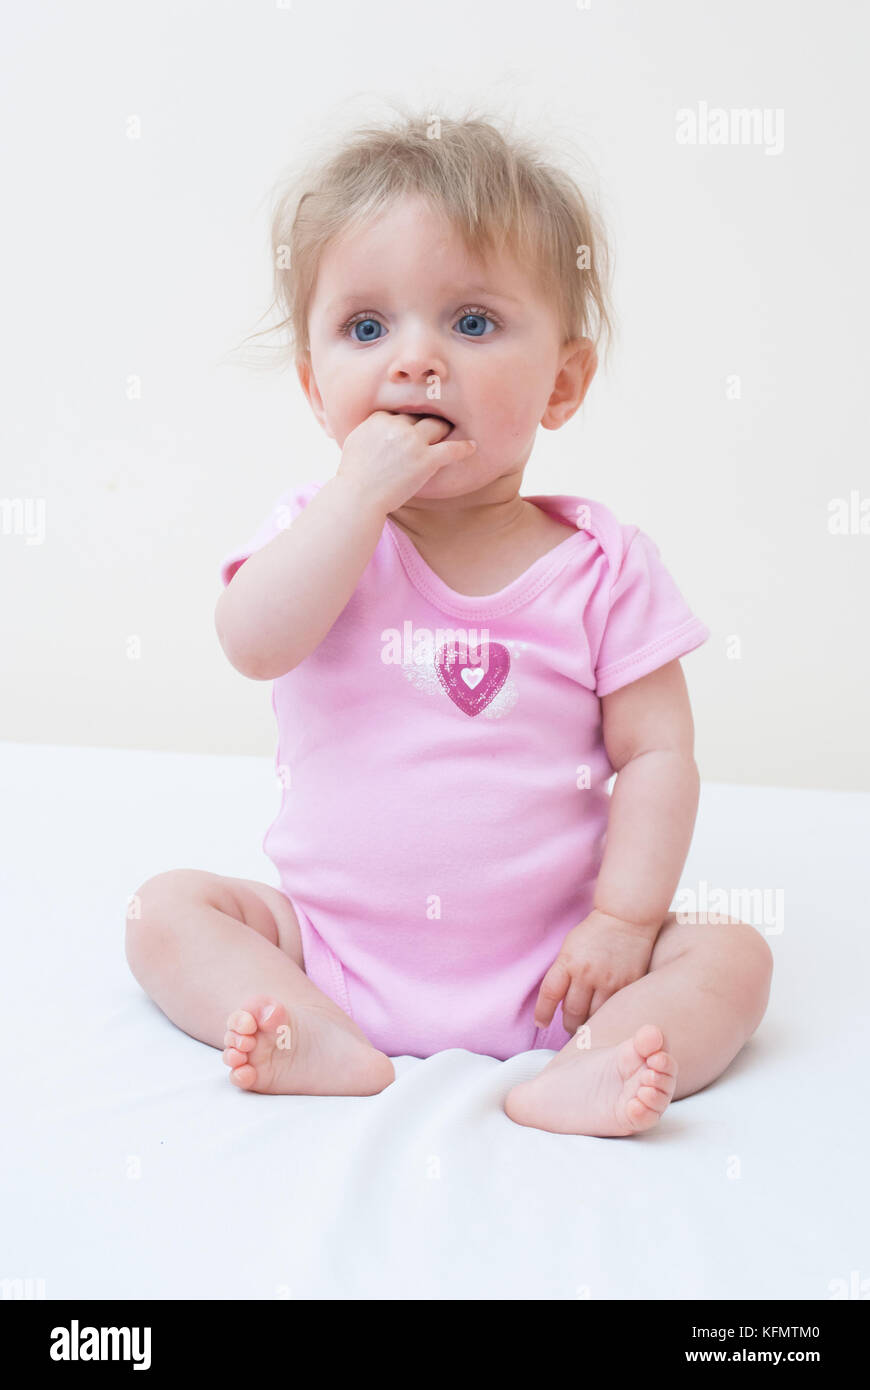 Adorable Cute Baby Teething With Her Fingers In Her Mouth Stock Photo